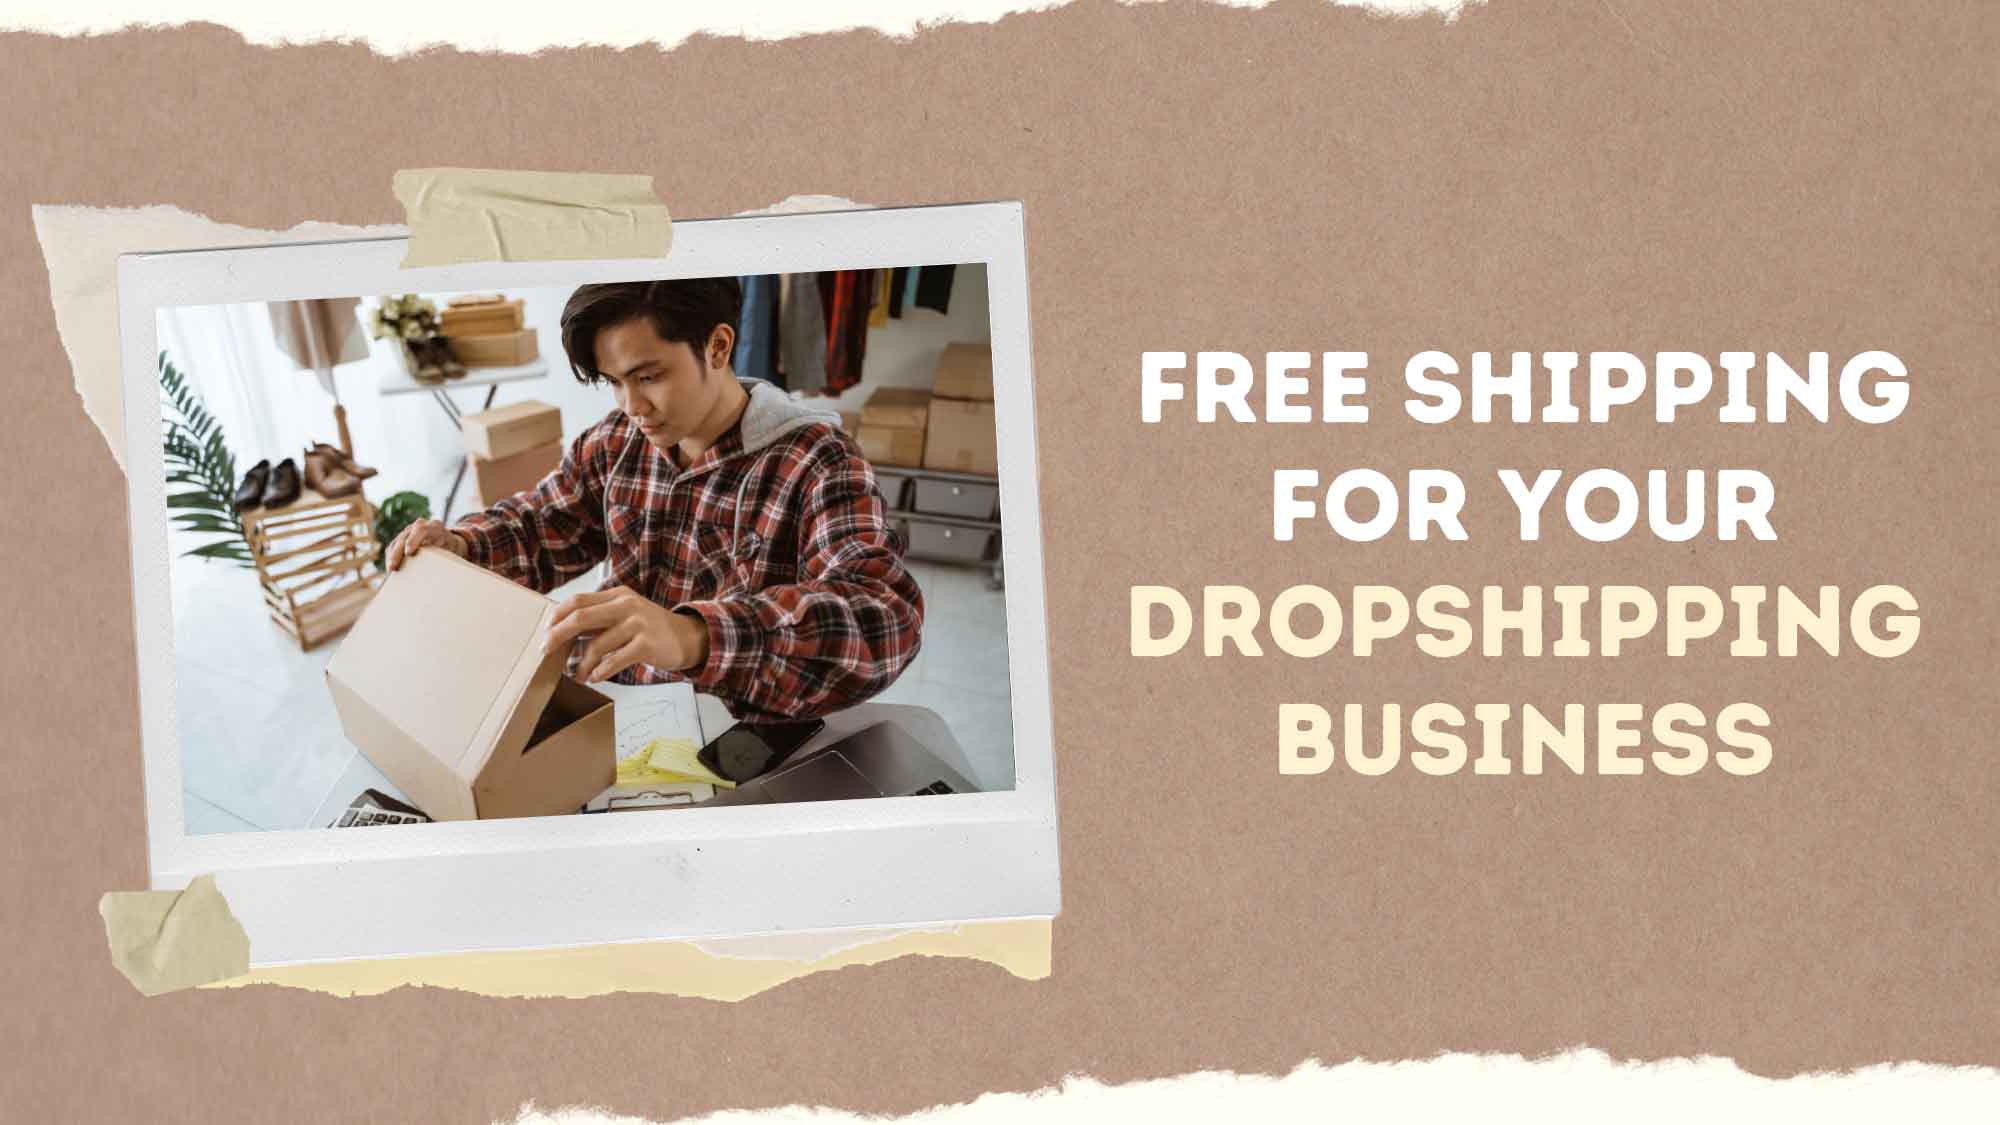 Tips On How To Get Free Shipping For Your Dropshipping Business